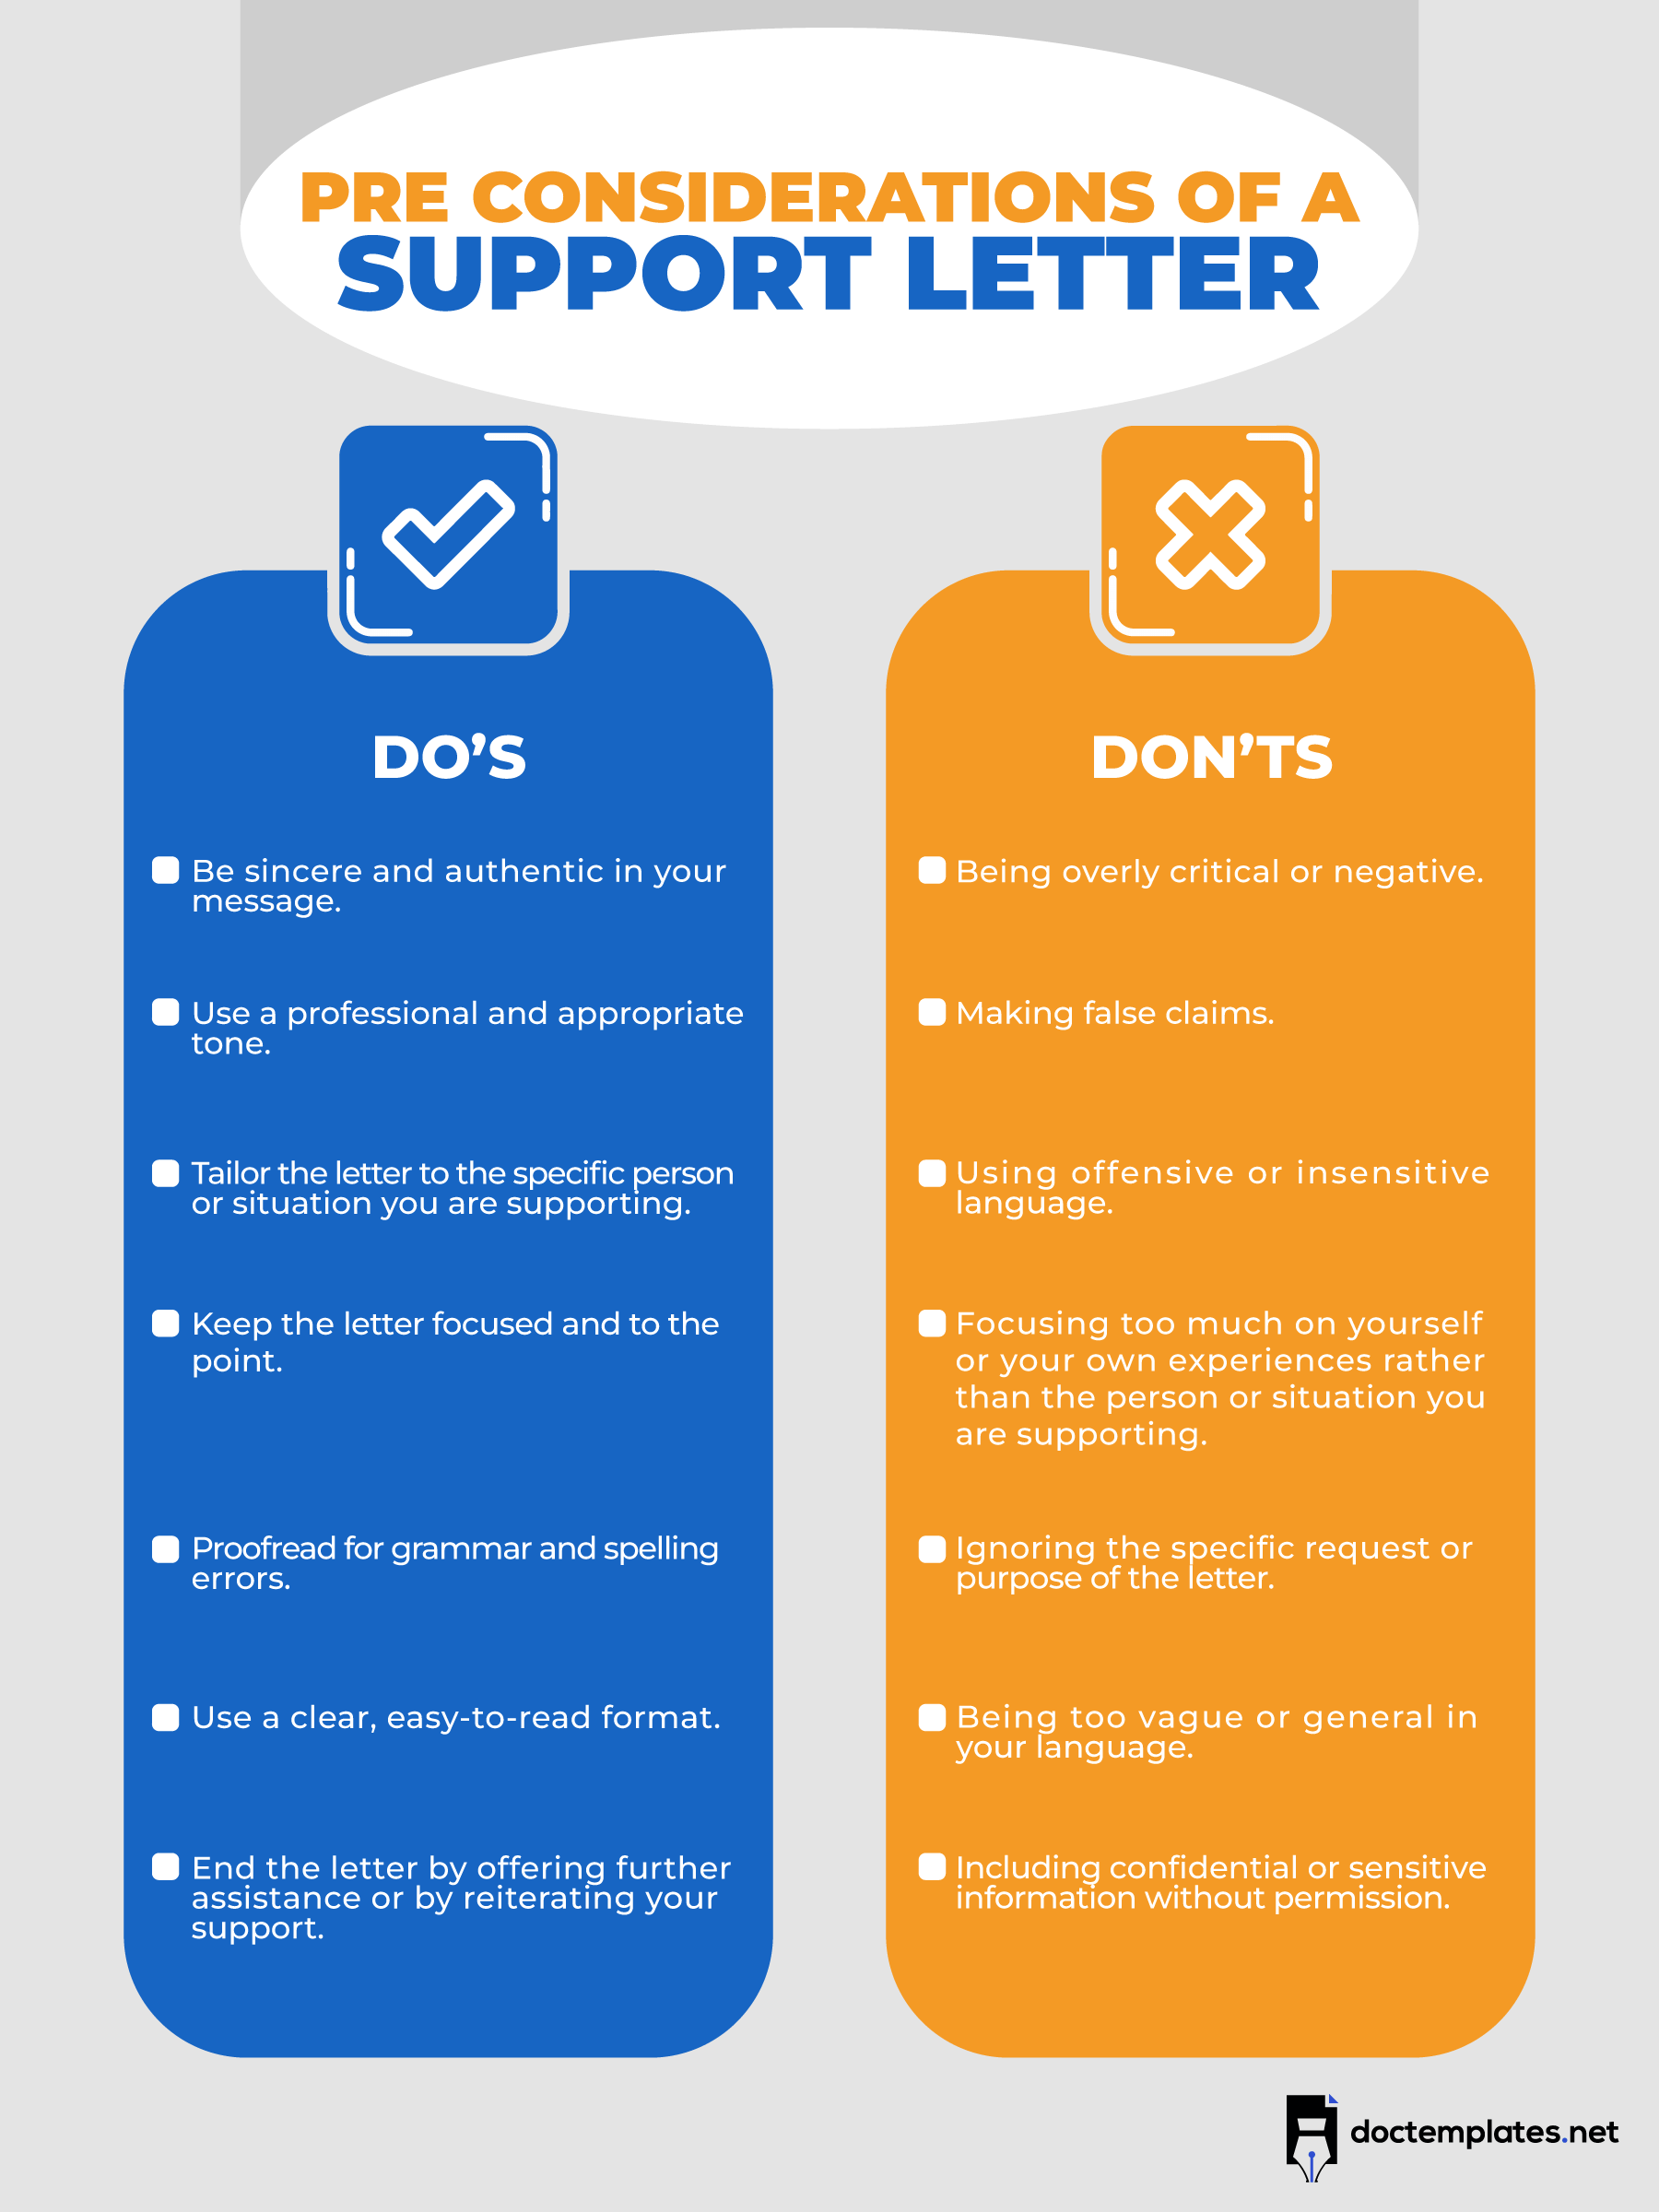 This infographic is about do's and don'ts of writing a support letter.